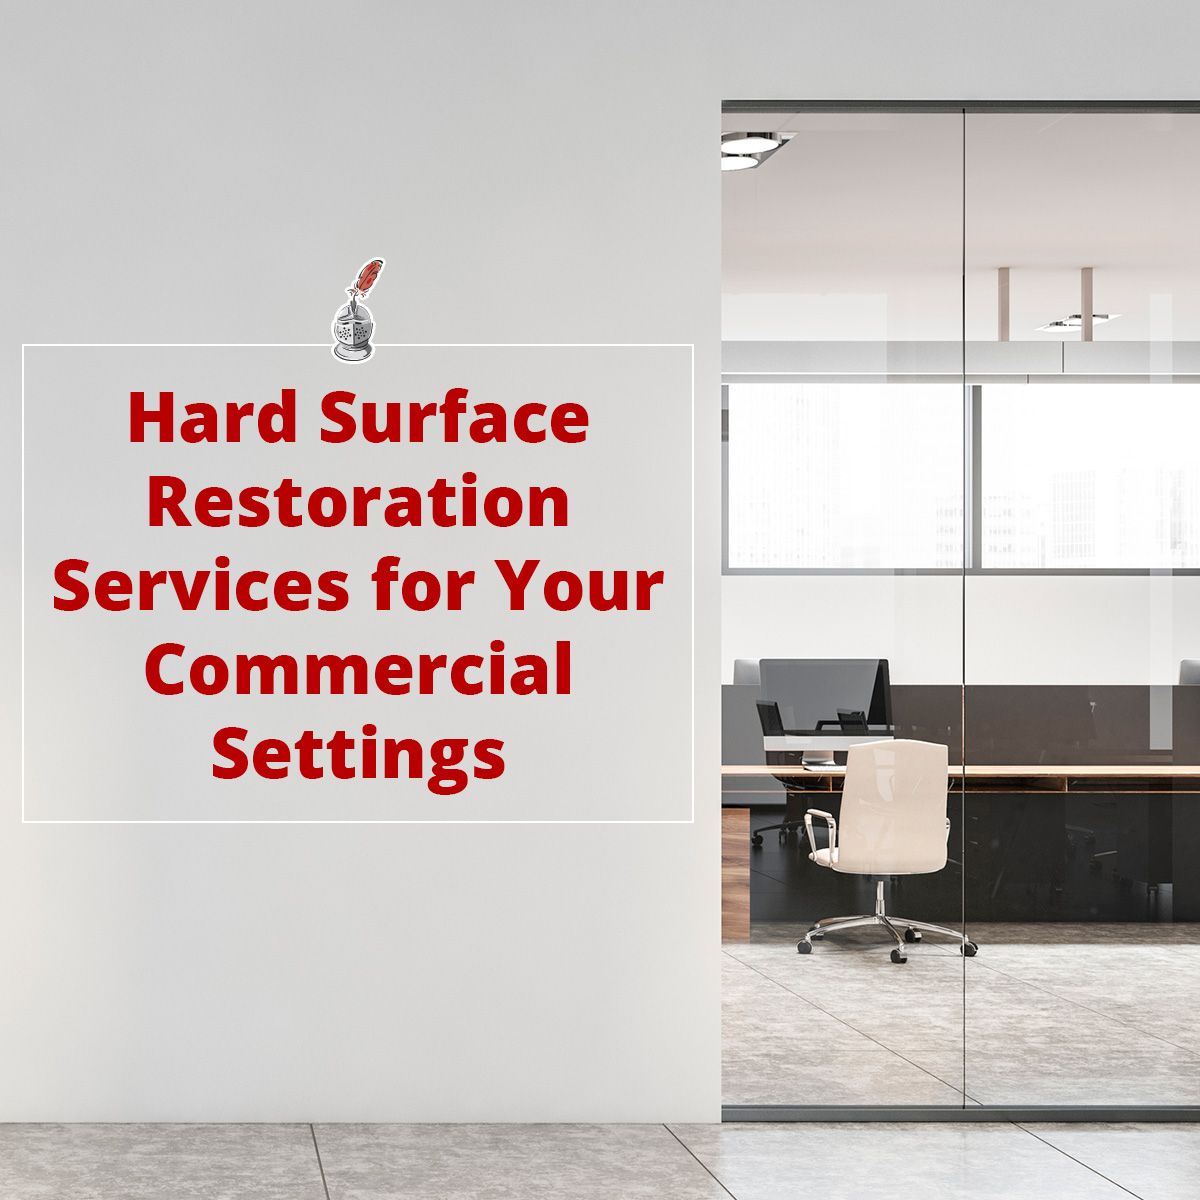 Hard Surface Restoration Services for Your Commercial Settings